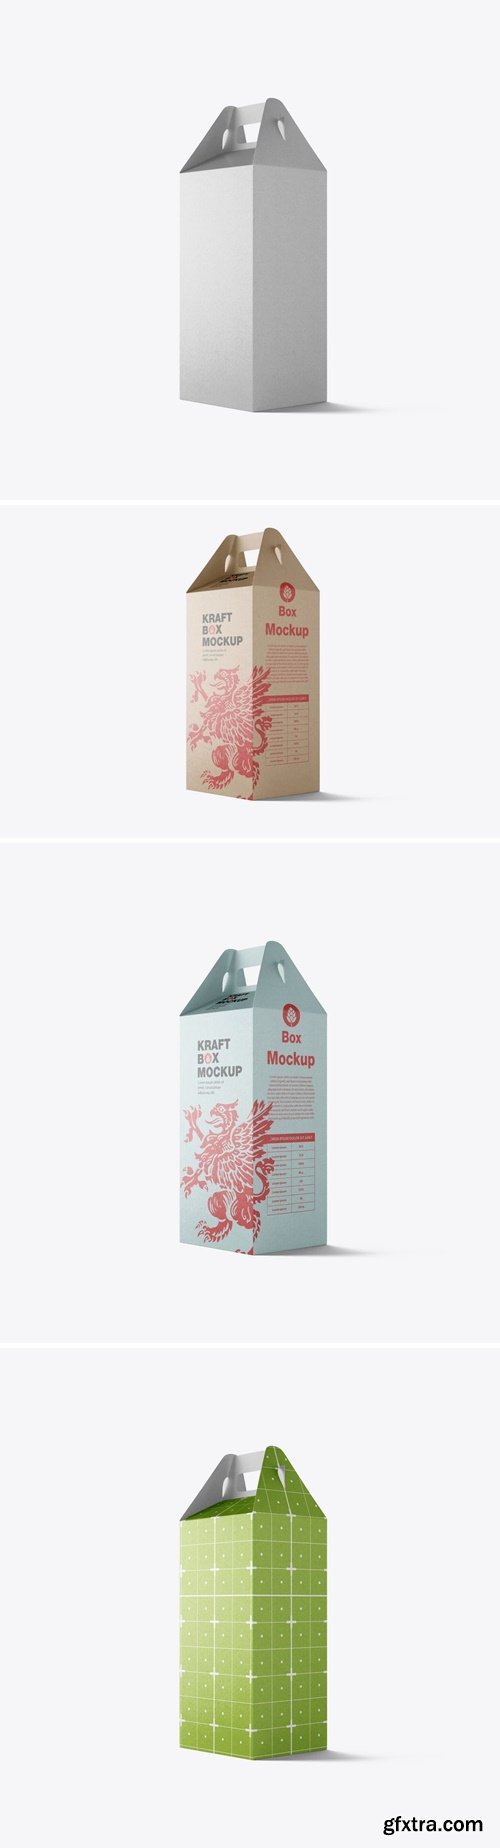 Packaging Box Mockup with Handle E29AMQH